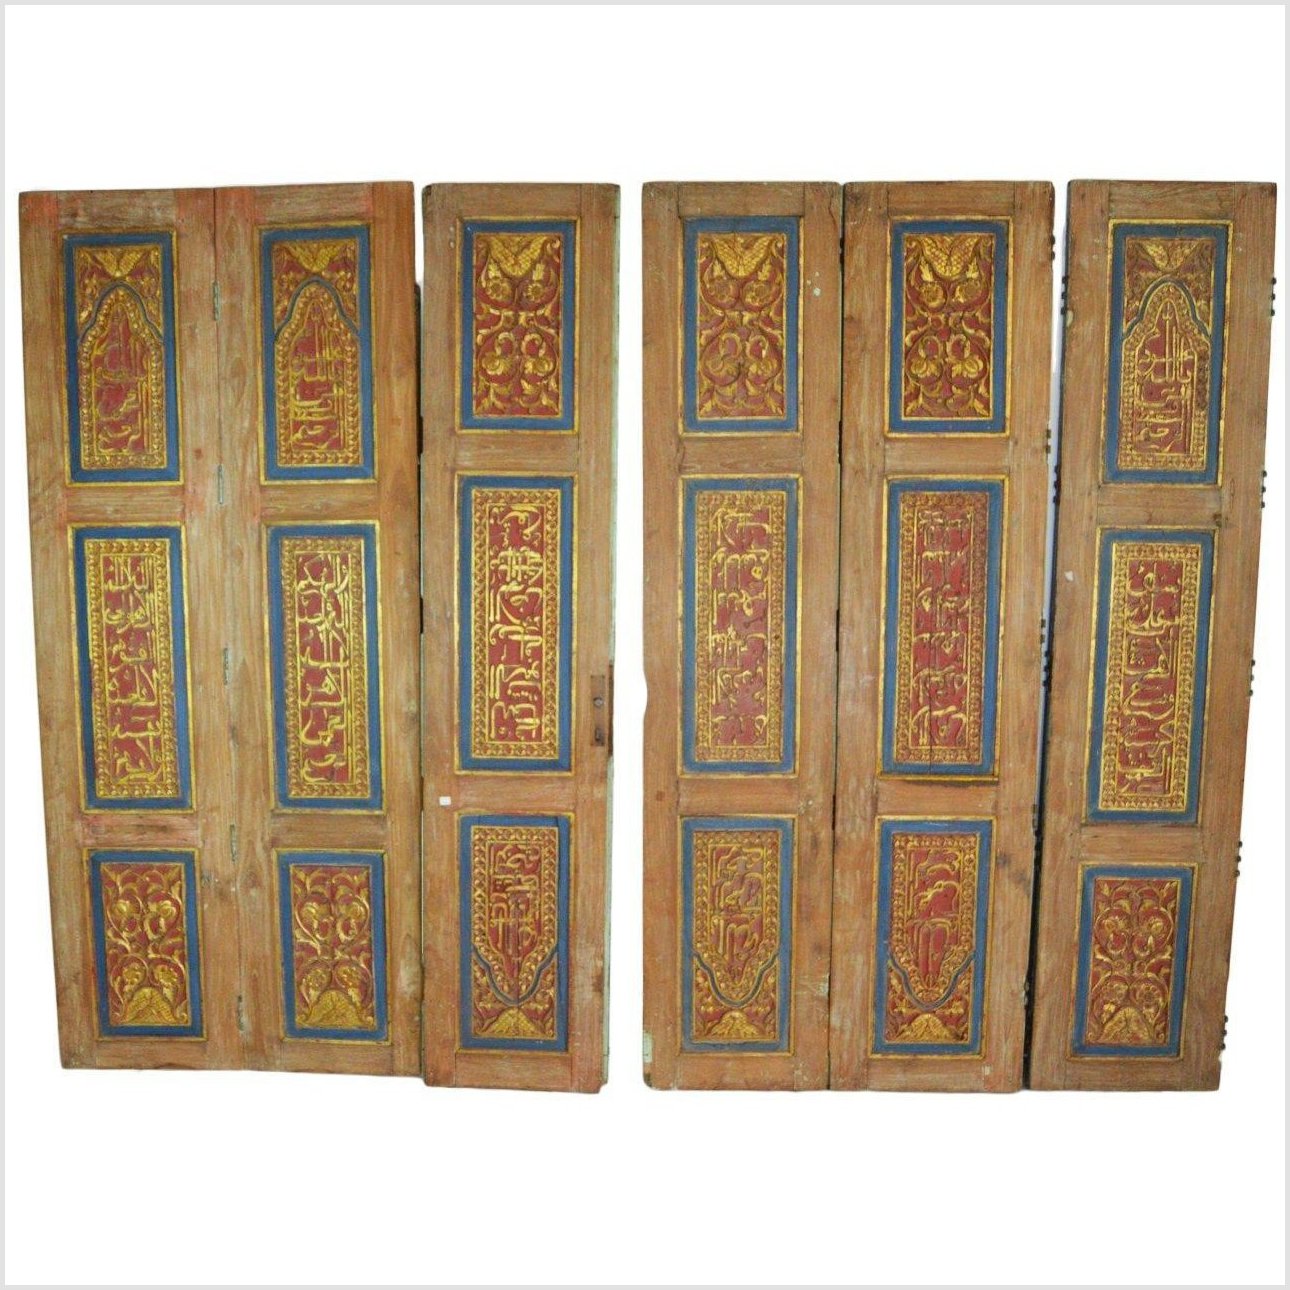 6-Panel Carved Wooden Screen with Indian Calligraphic Inscriptions-YN2917-1. Asian & Chinese Furniture, Art, Antiques, Vintage Home Décor for sale at FEA Home